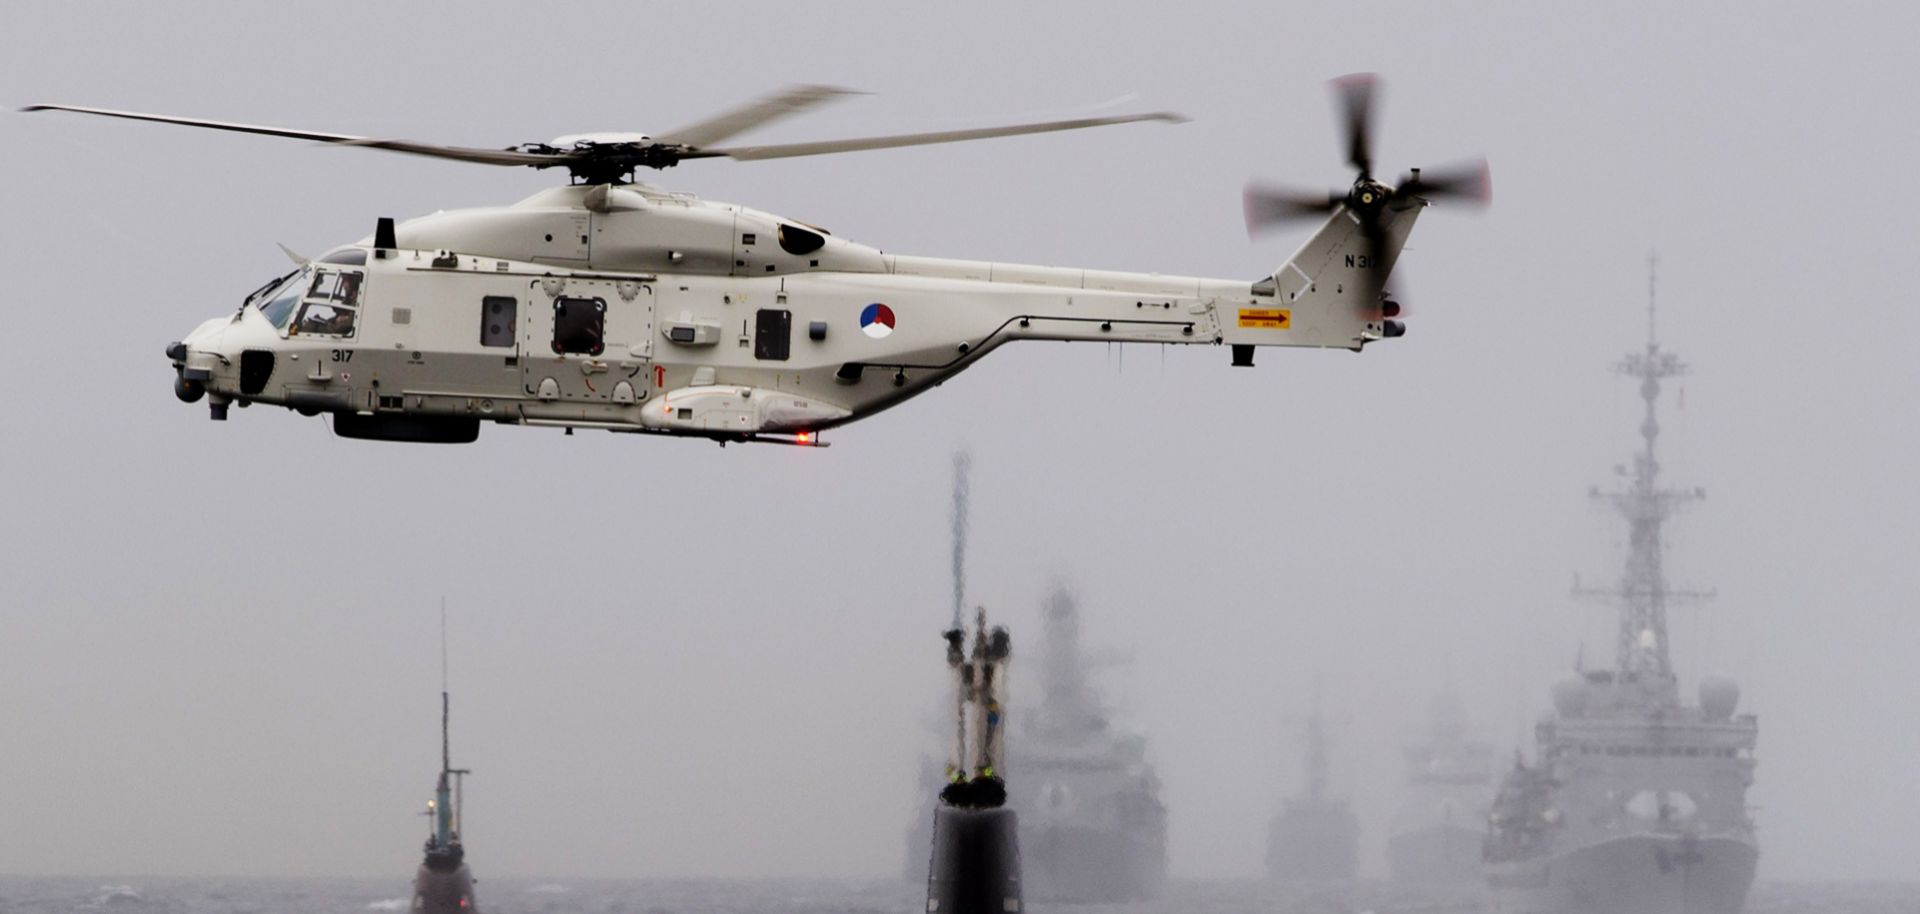 A Dutch helicopter participates in a NATO anti-submarine exercise in the North Sea on May 4.